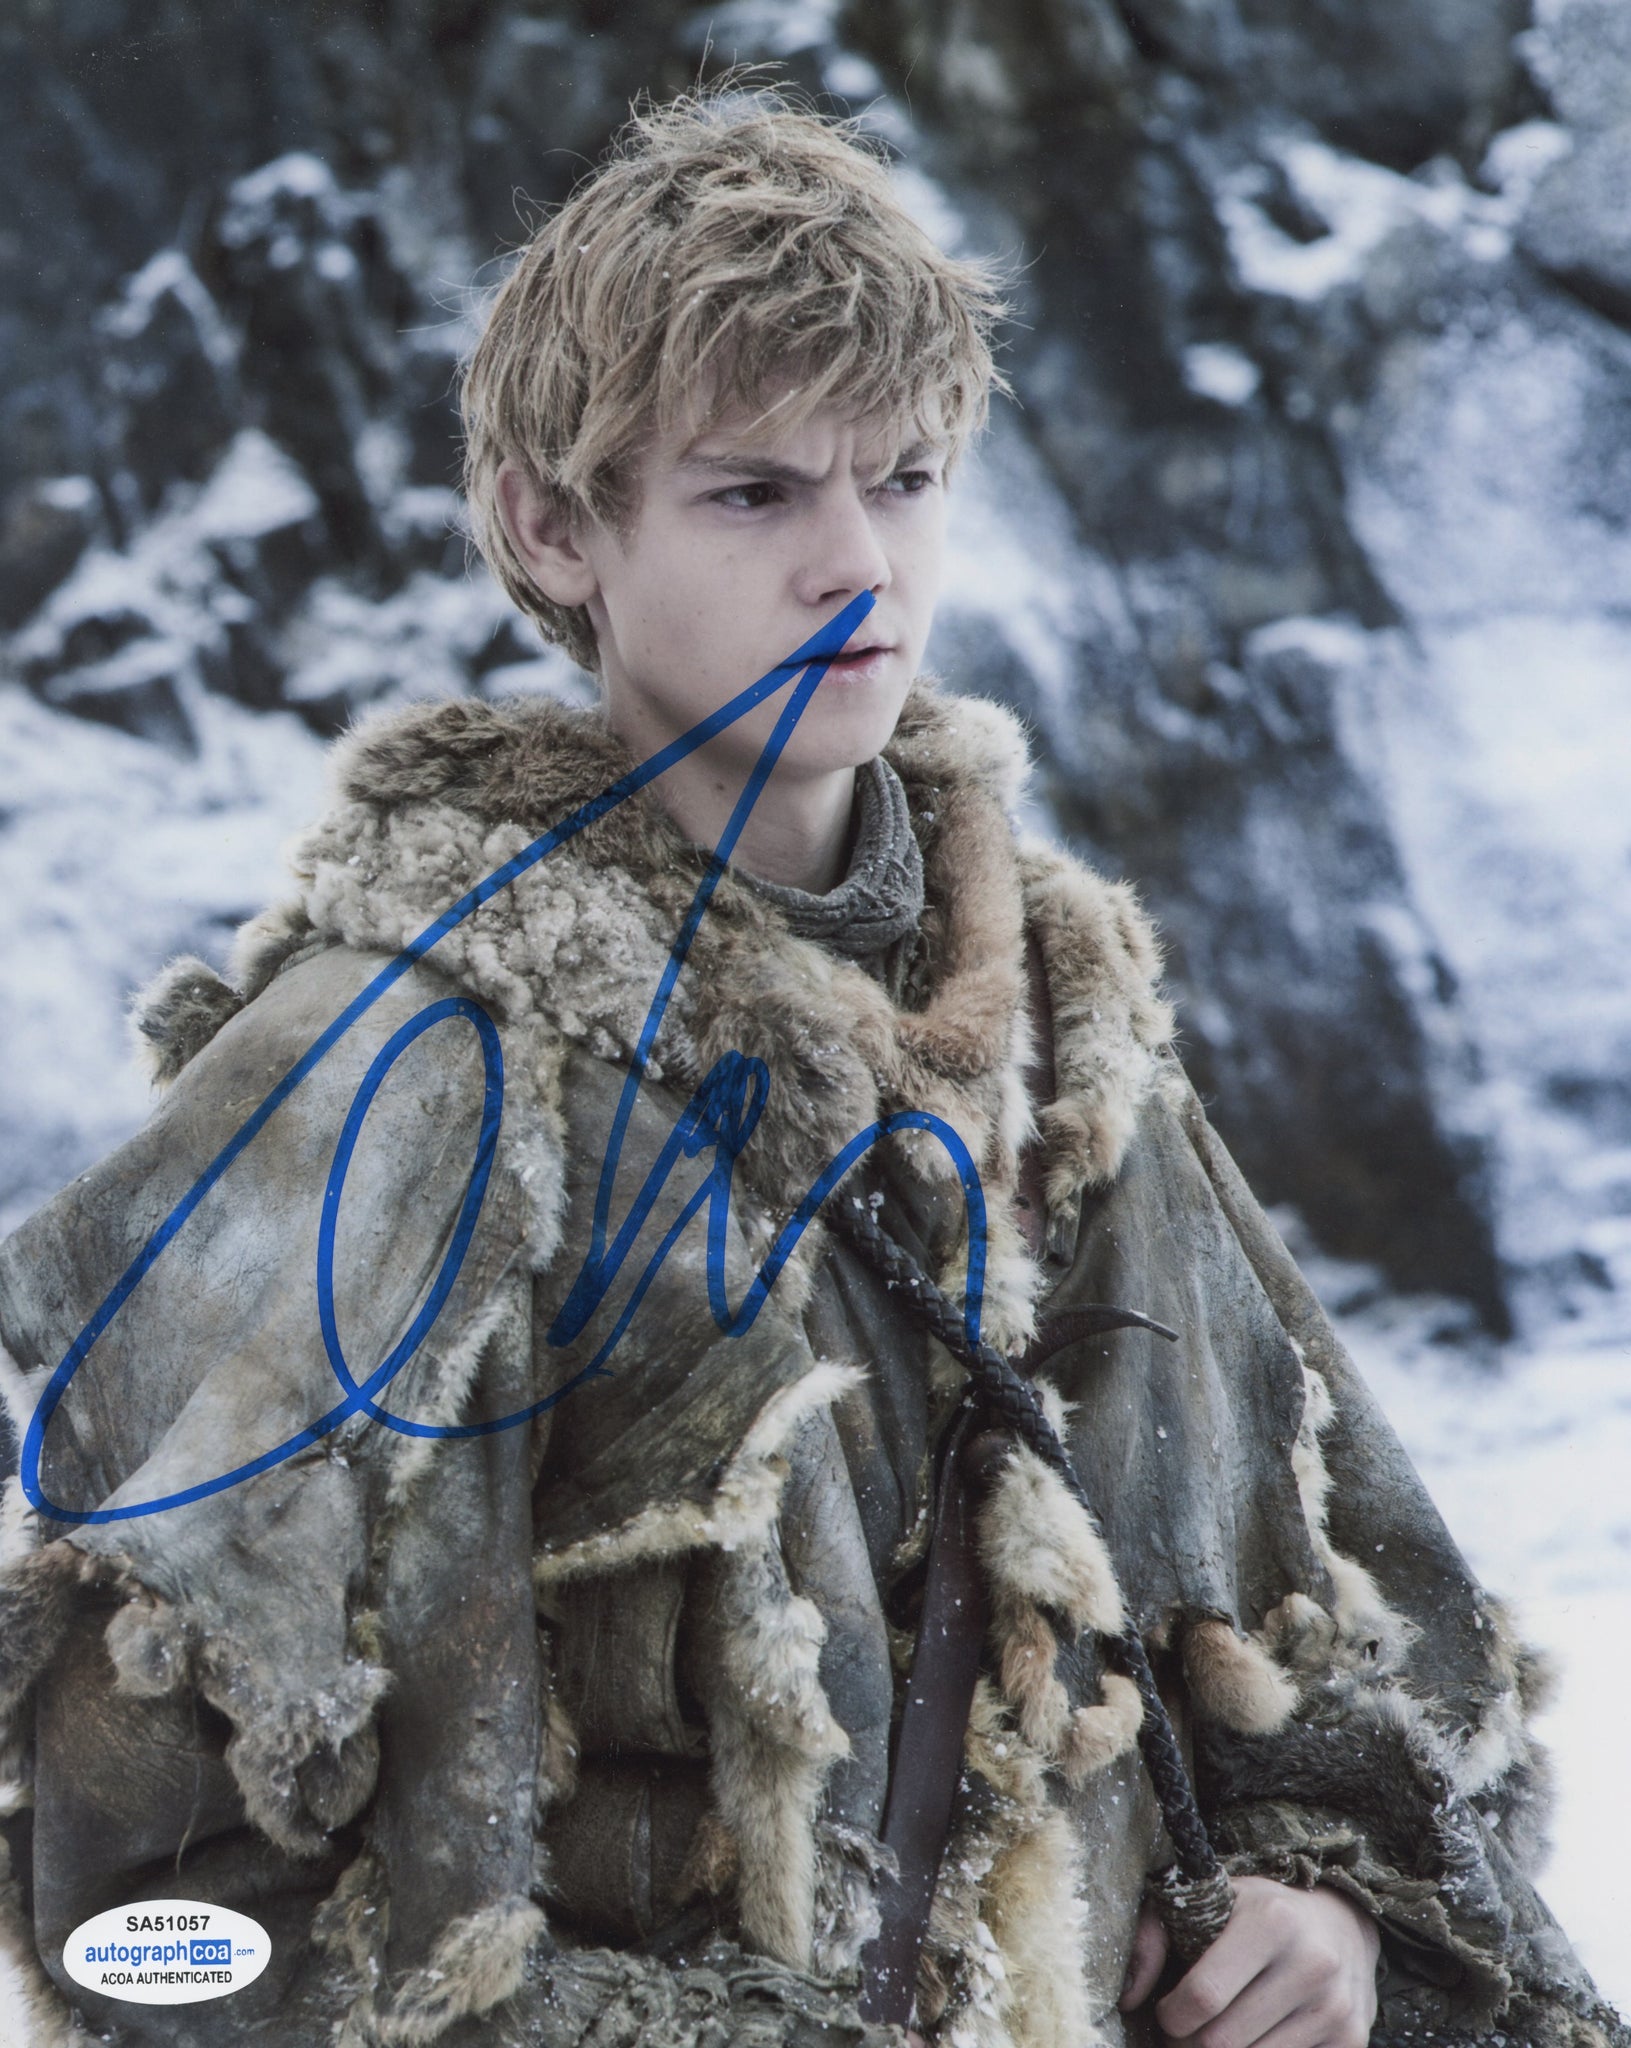 Thomas Brodie Sangster Maze Runner Autographed Signed 8x10 Photo reprint